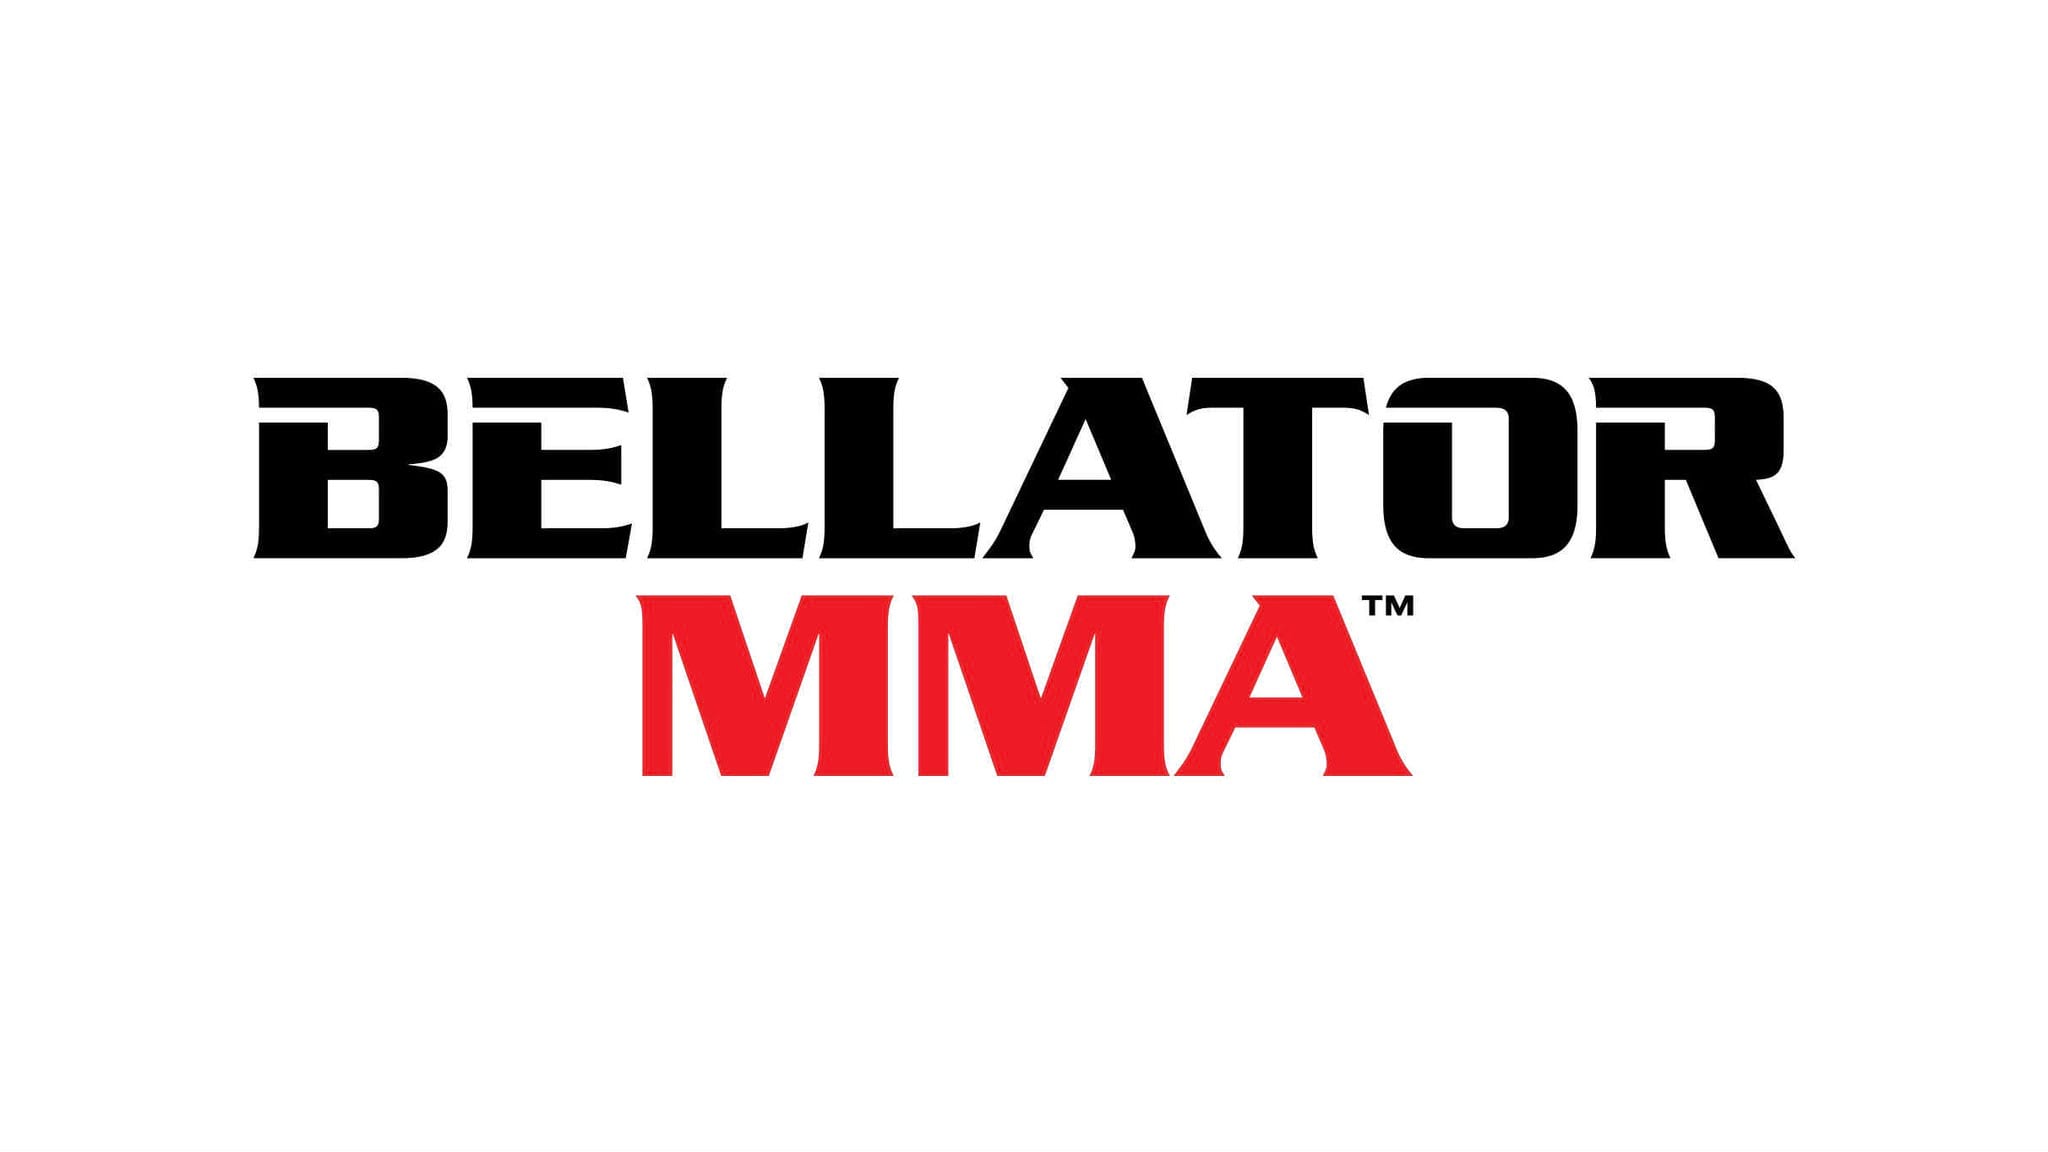 Bellator MMA will have international pay-per-views broadcast live on Sky Sports in landmark deal